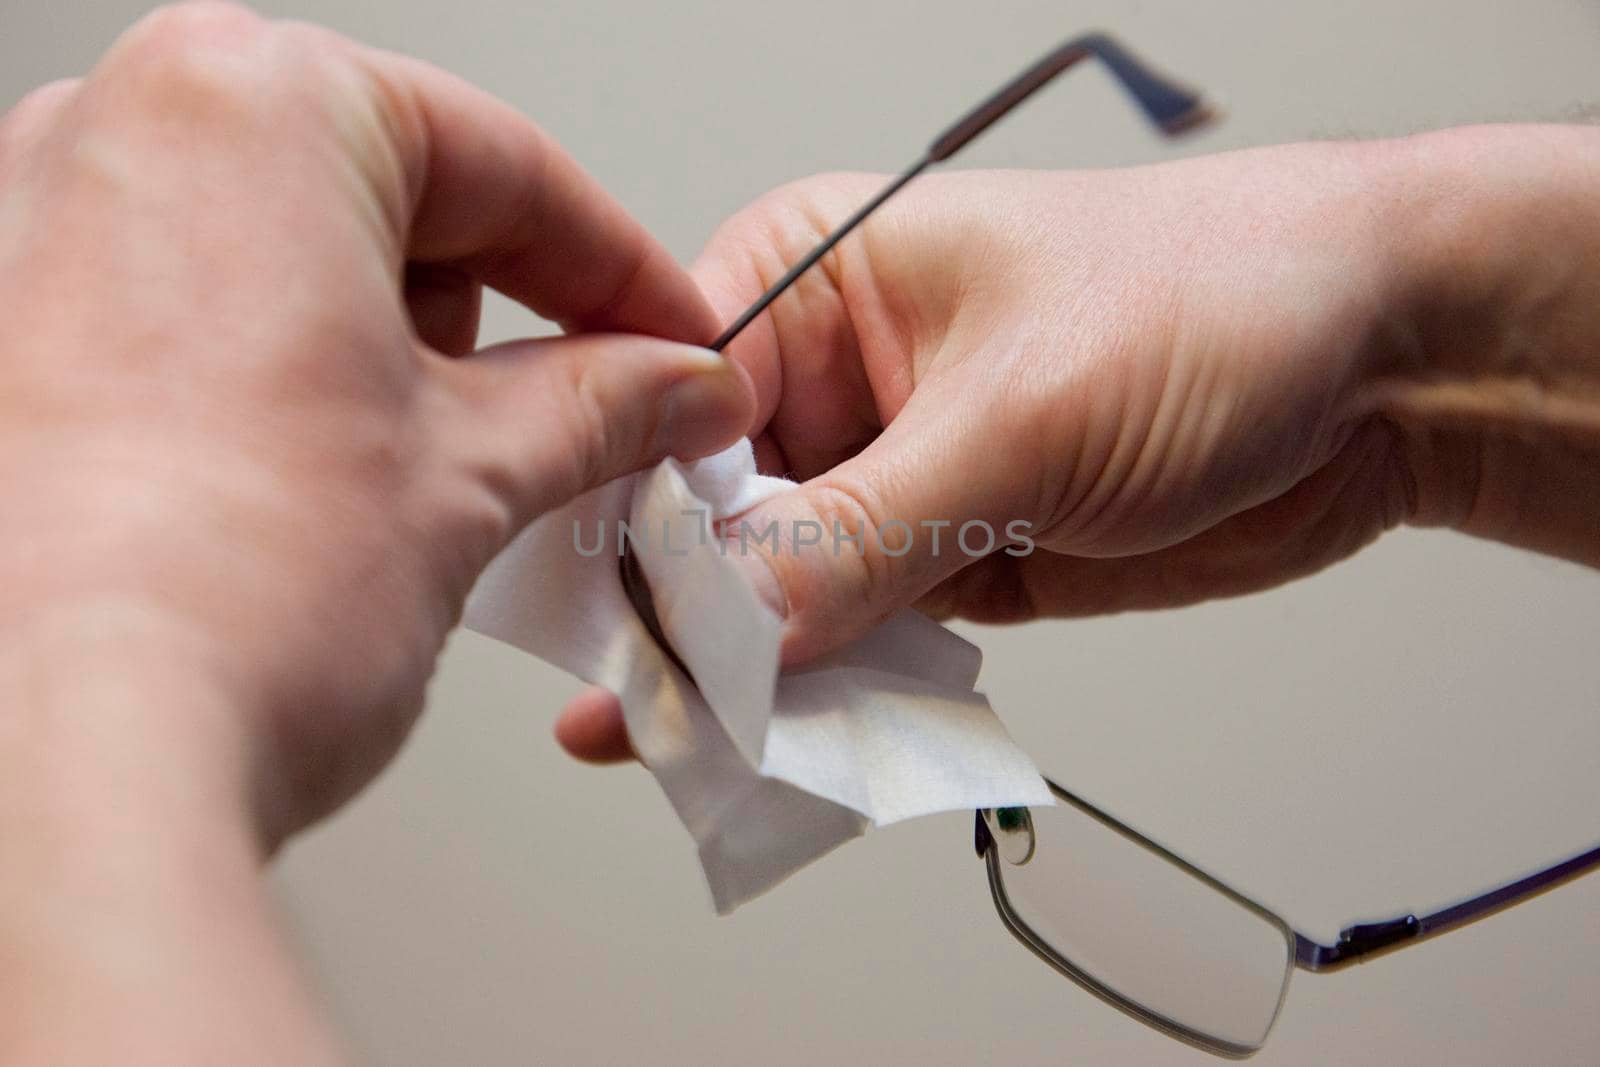 A hand uses a wipe to clean the dirt of a pair of eye glasses